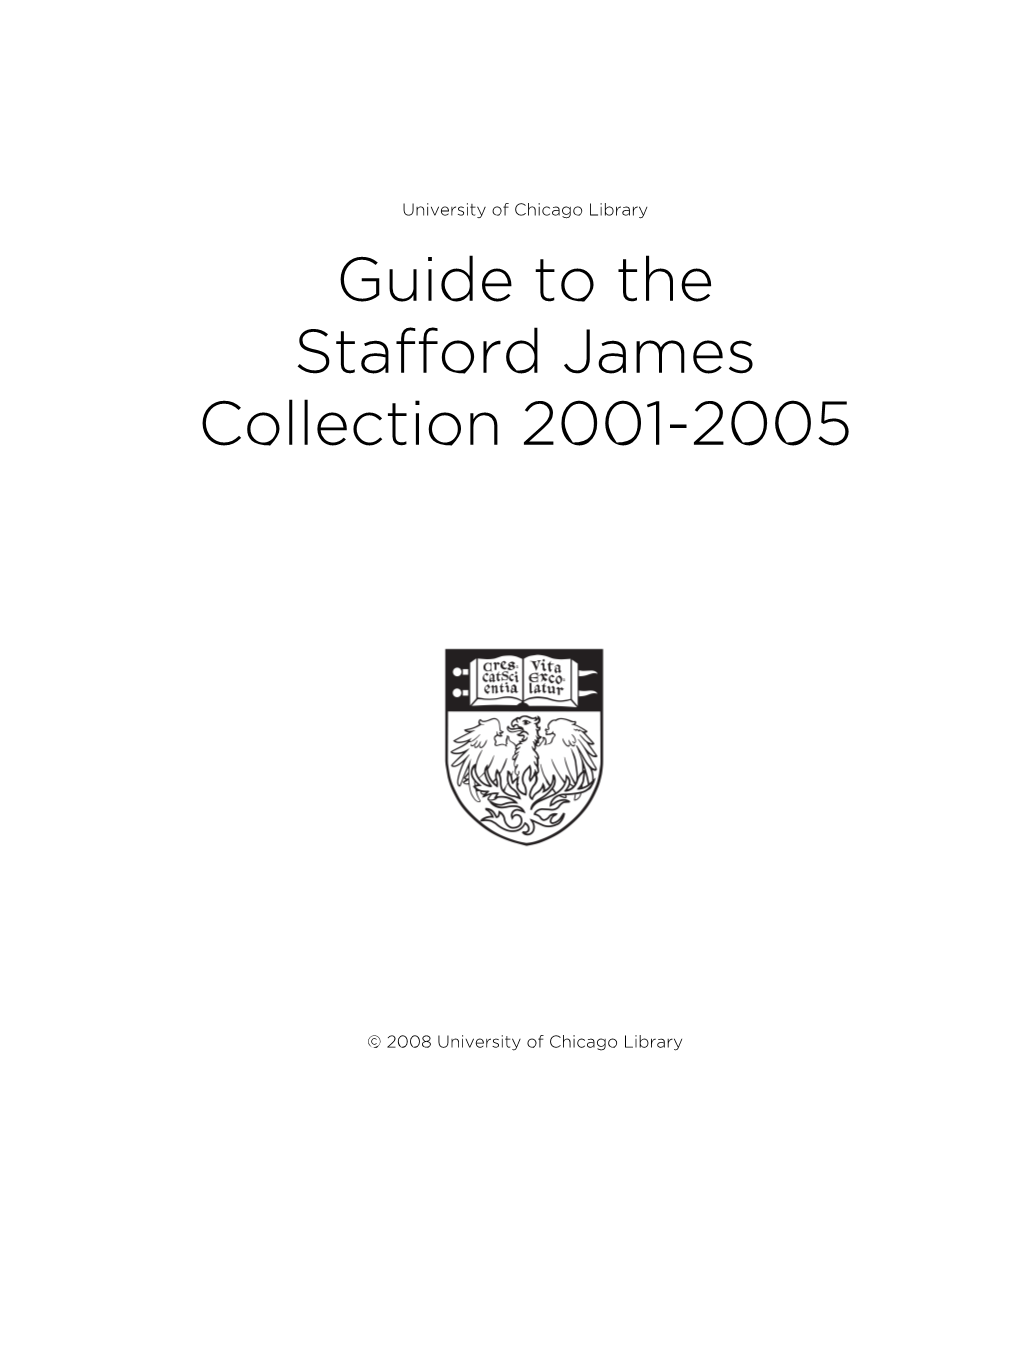 Guide to the Stafford James Collection 2001-2005